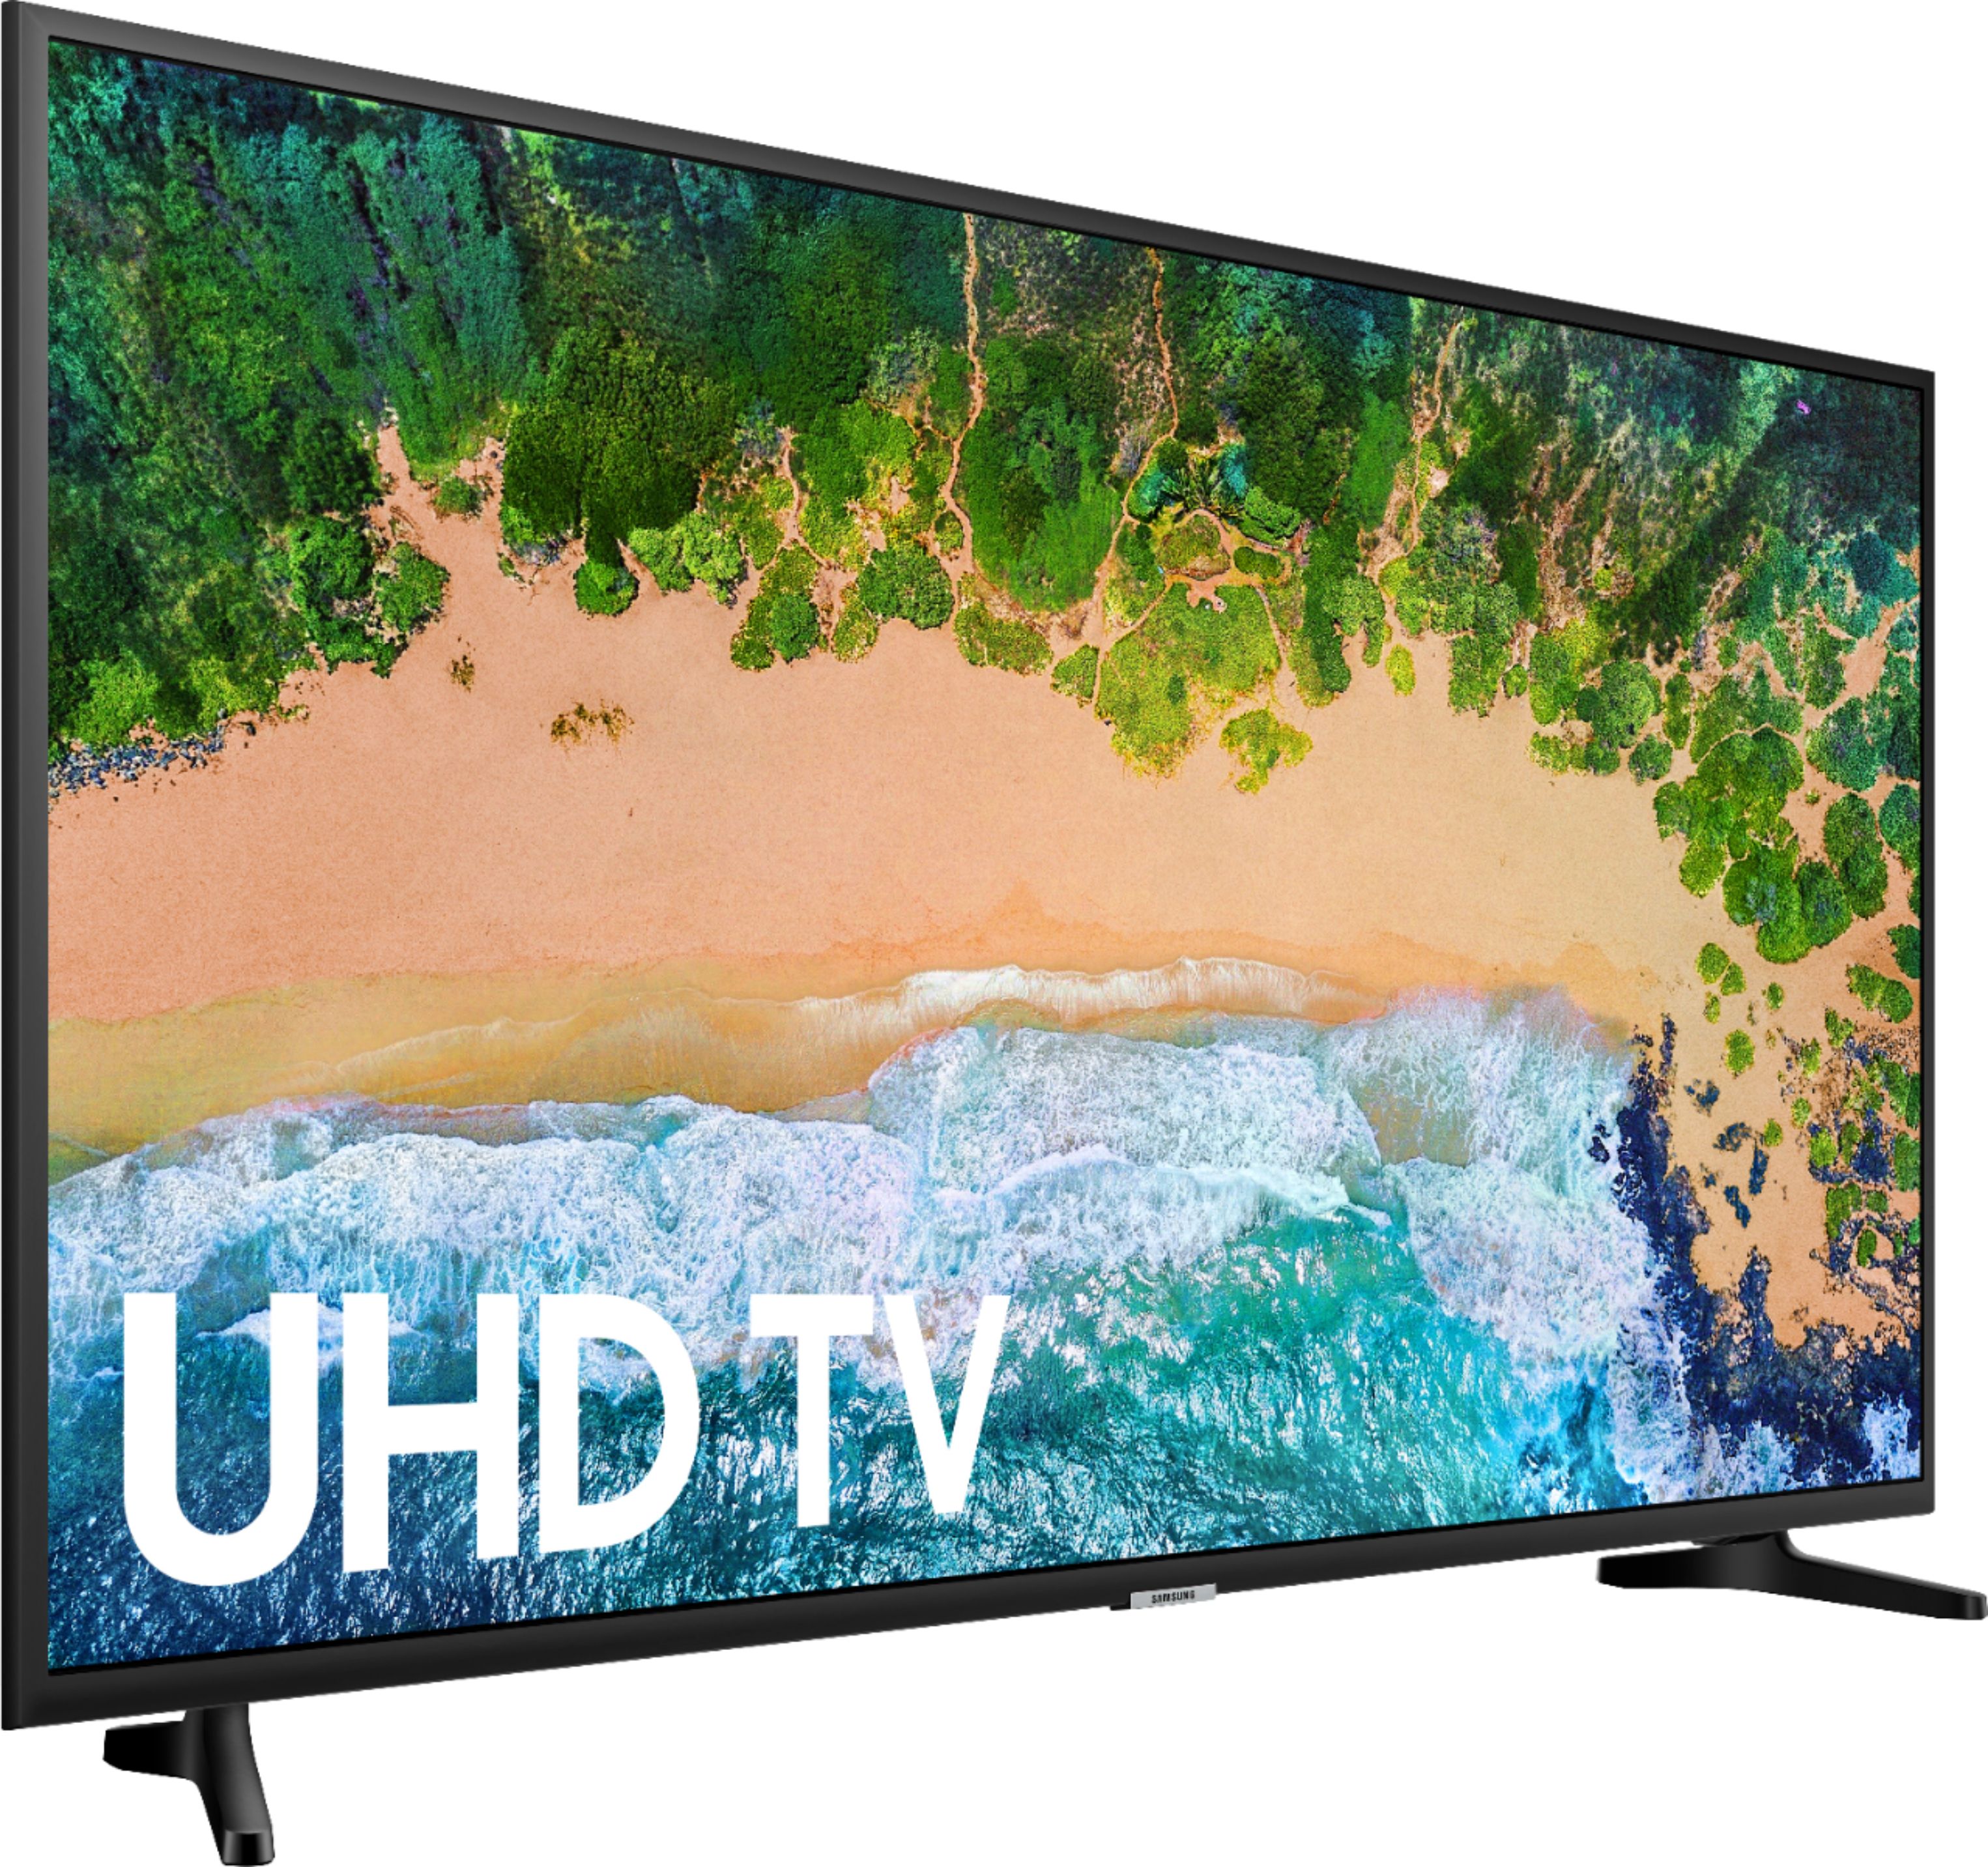 LED Samsung Smart 4K UHD TV with HDR 2160p 50/" Class NU6900 Series